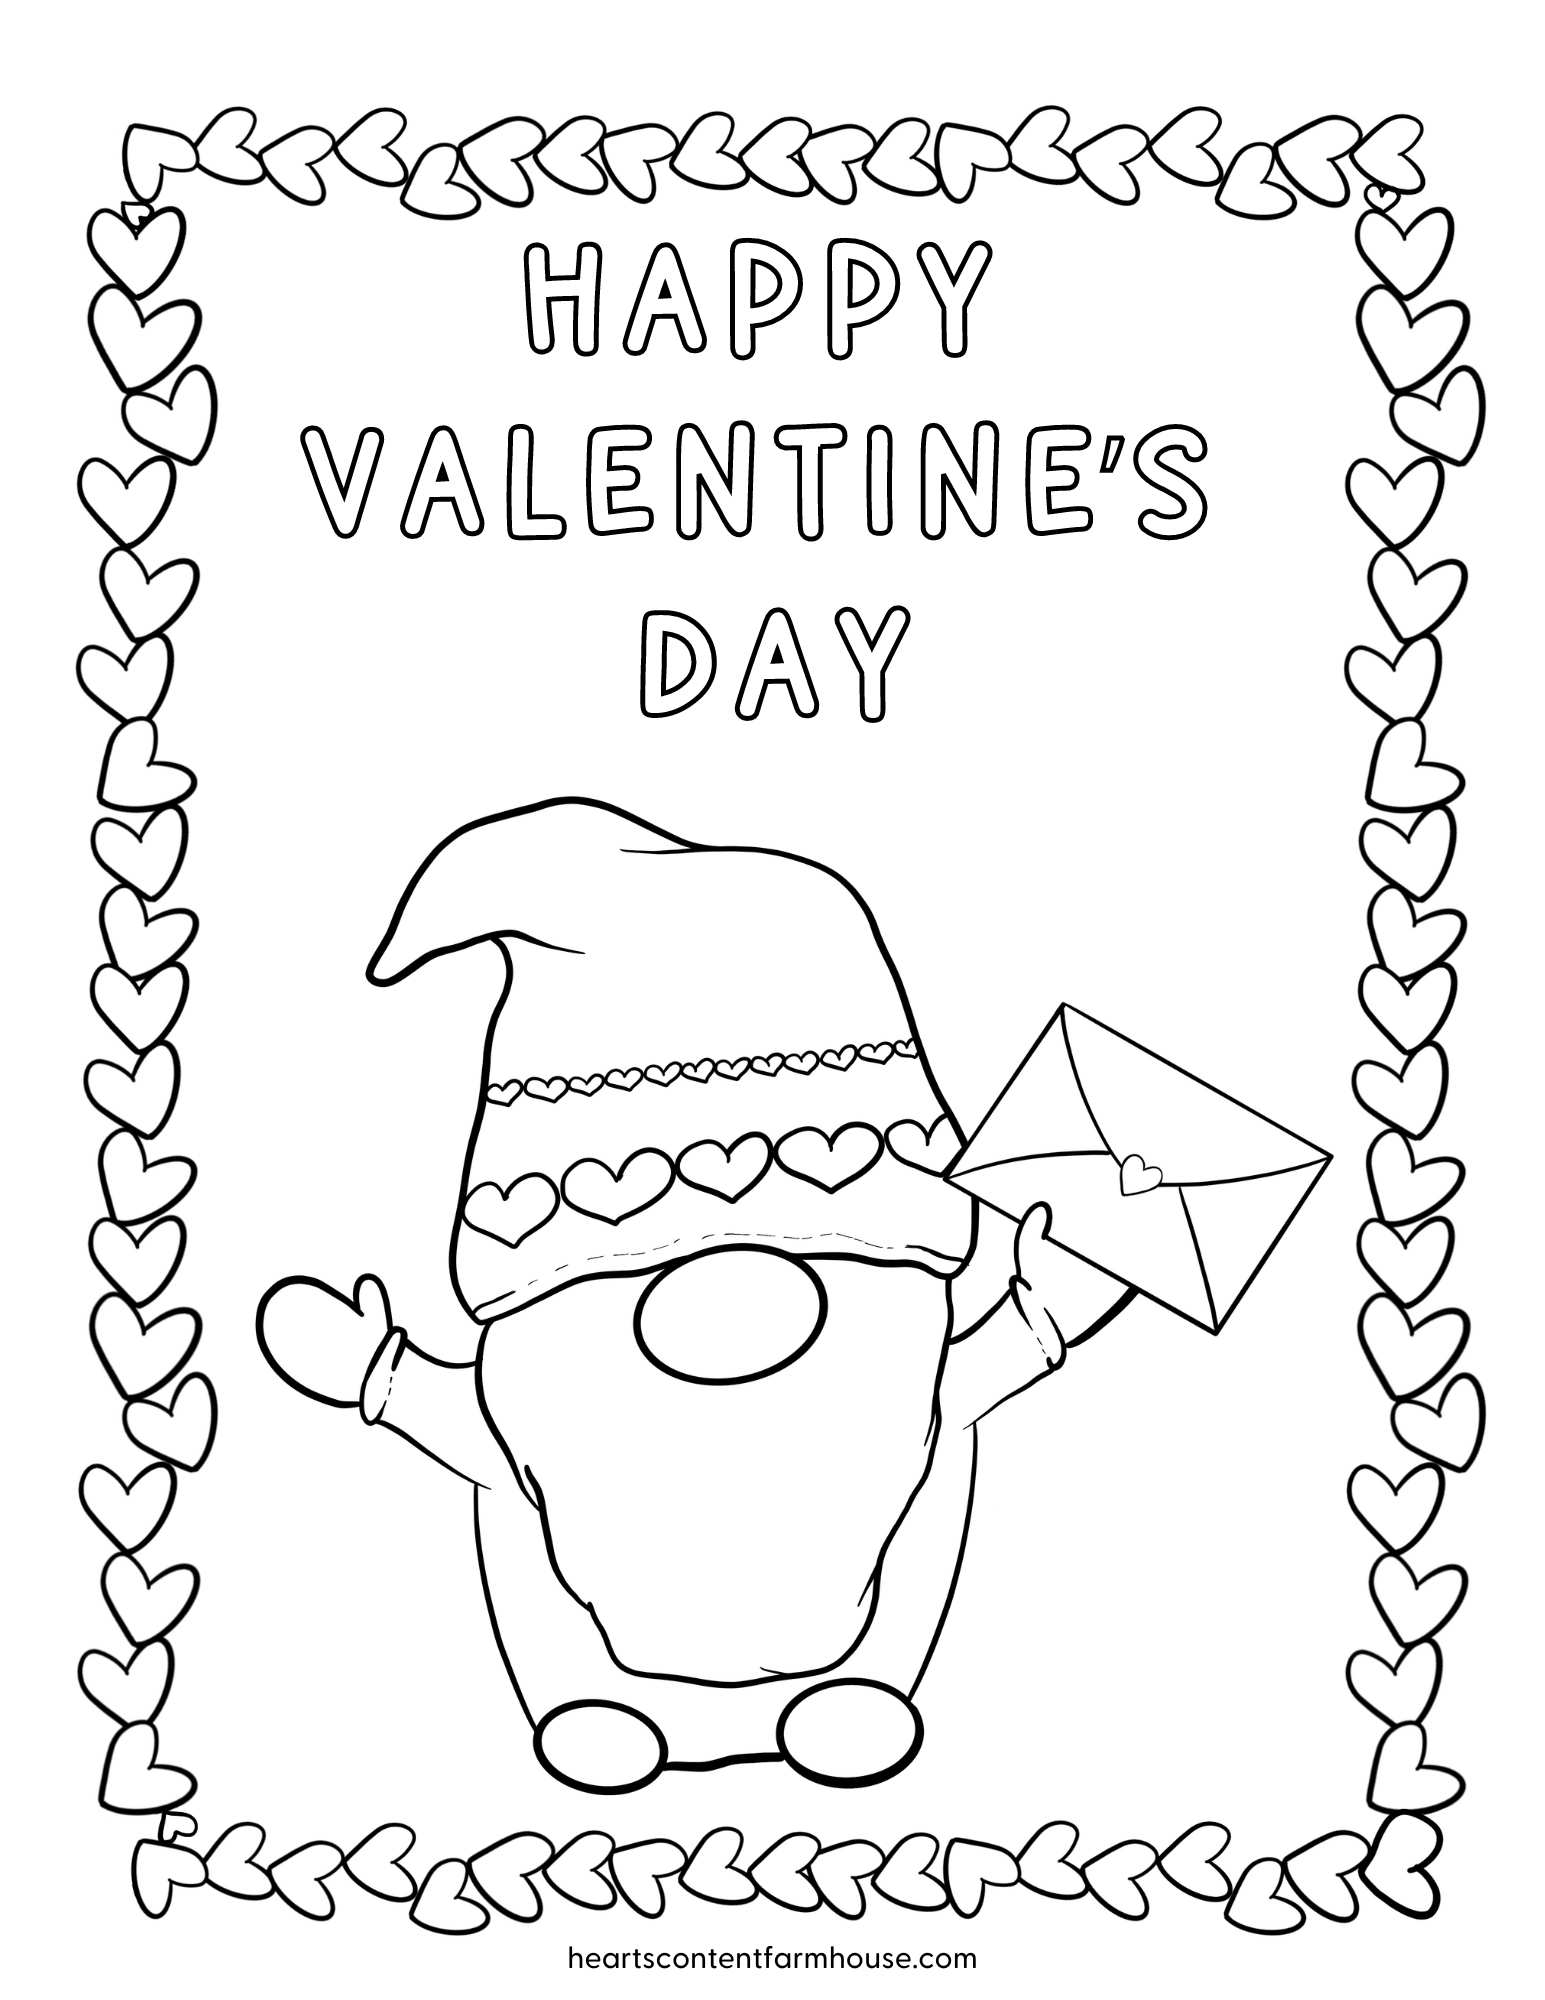 Cute valentine gnome coloring pages to print for endless fun